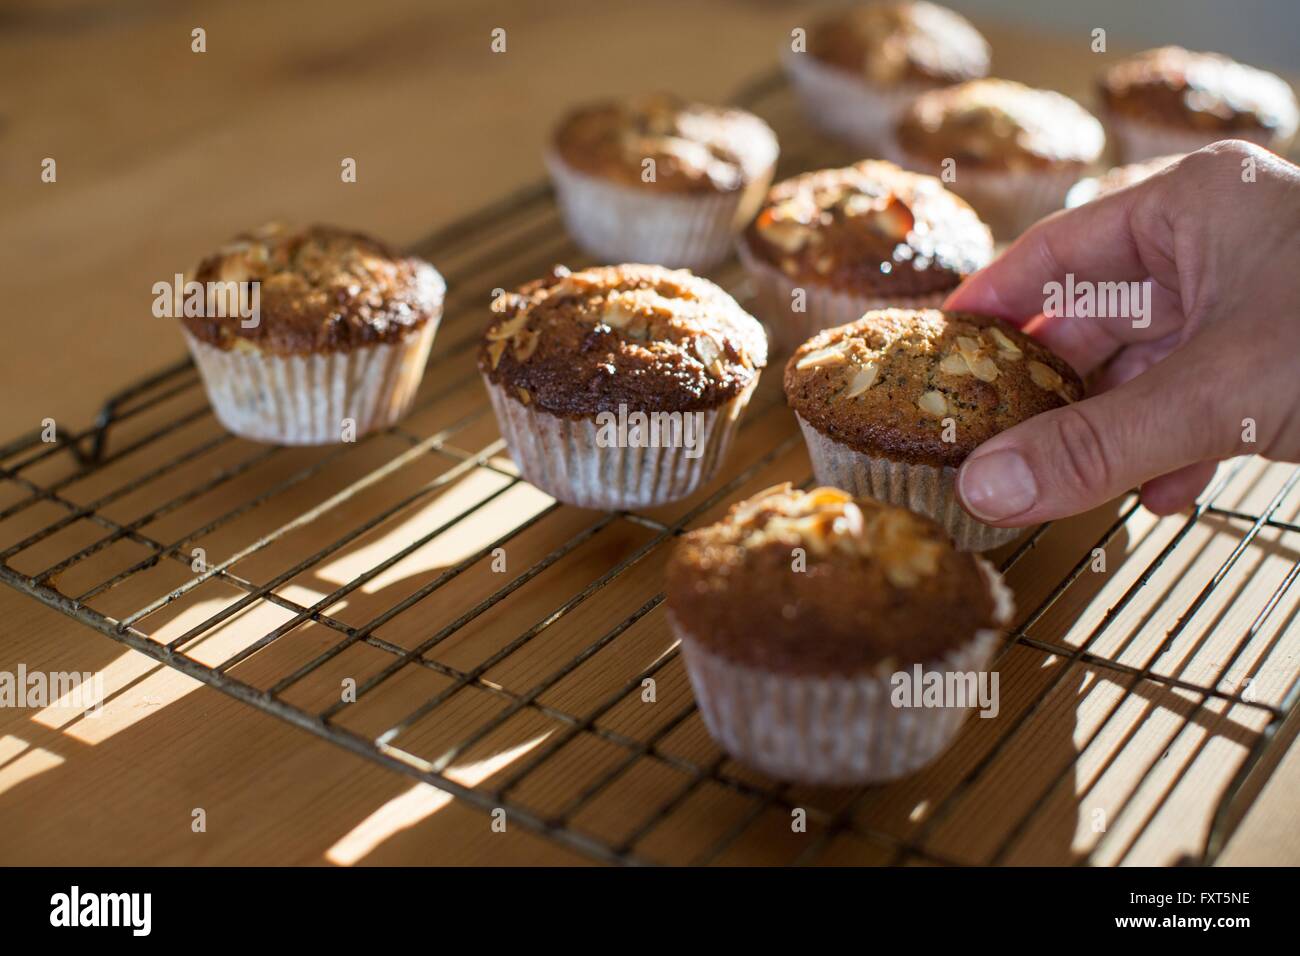 Hand picking up gluten free muffins from cooling tray Stock Photo